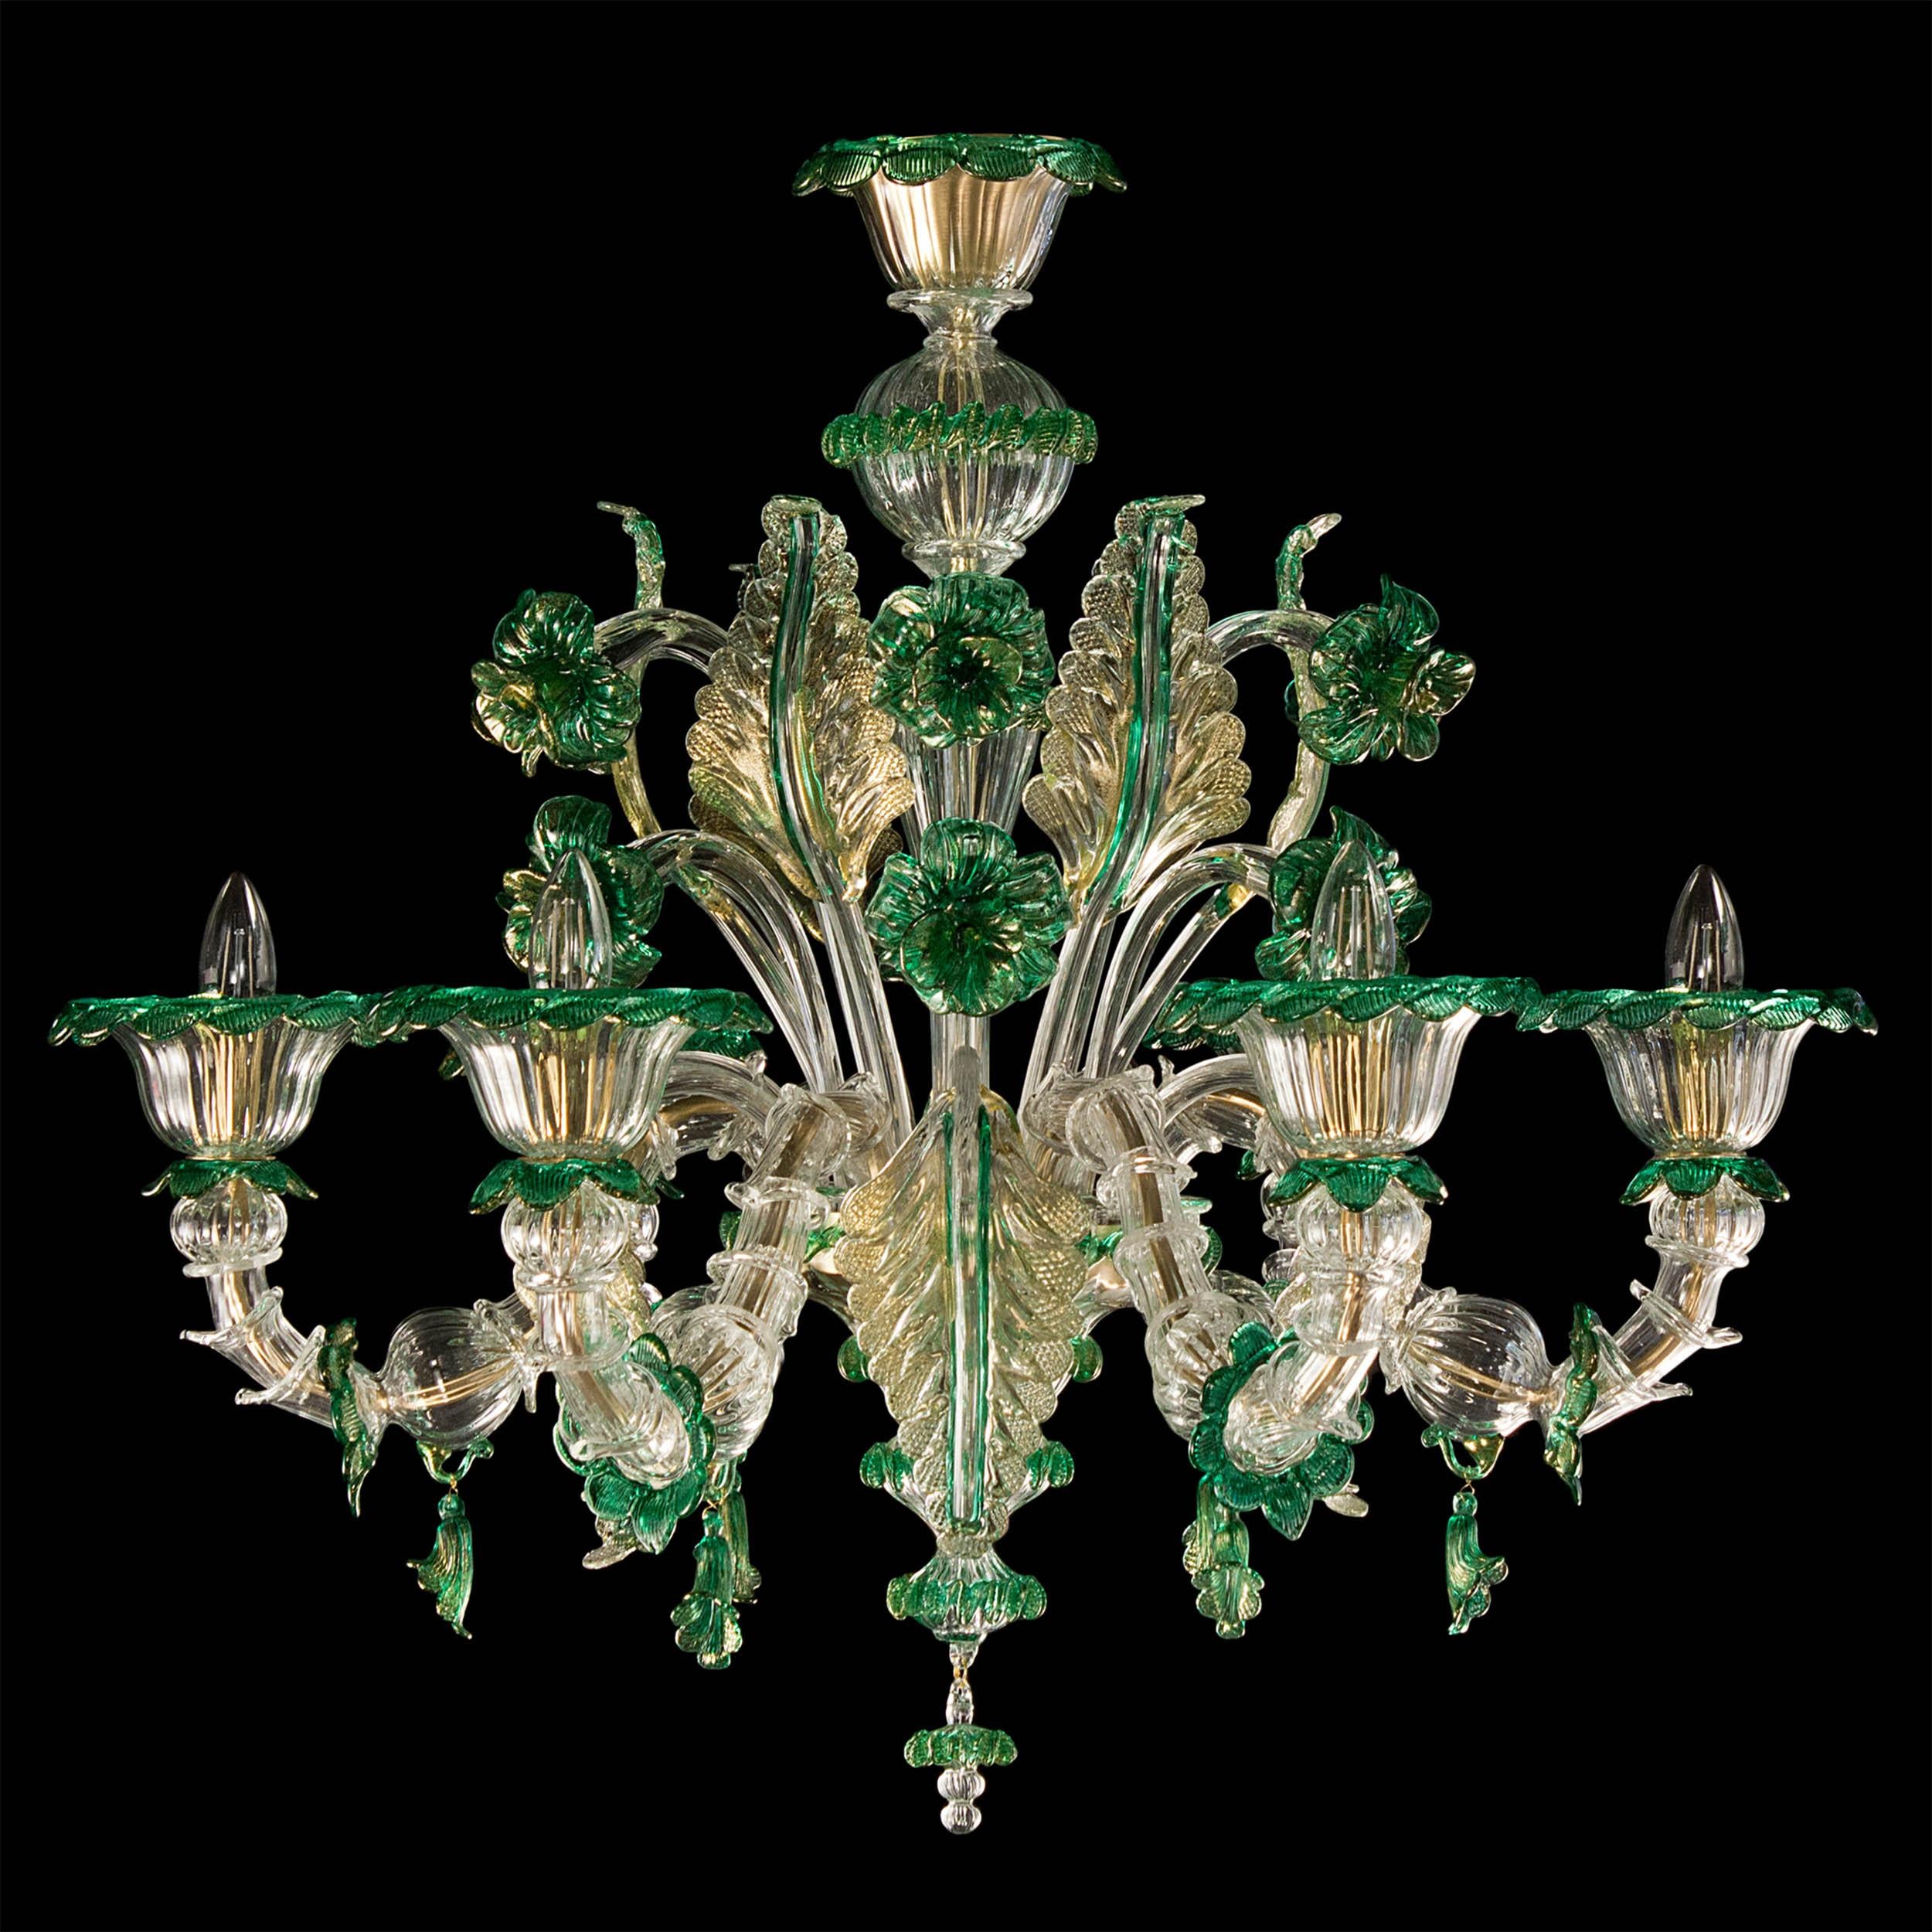 Rich rezzonico chandelier 6 arms, clear- gold-green Murano glass, double level of flowers by Multiforme
This chandelier evokes the splendour of the past centuries. It is an evergreen model, a Classic product manufactured by our skilled masters